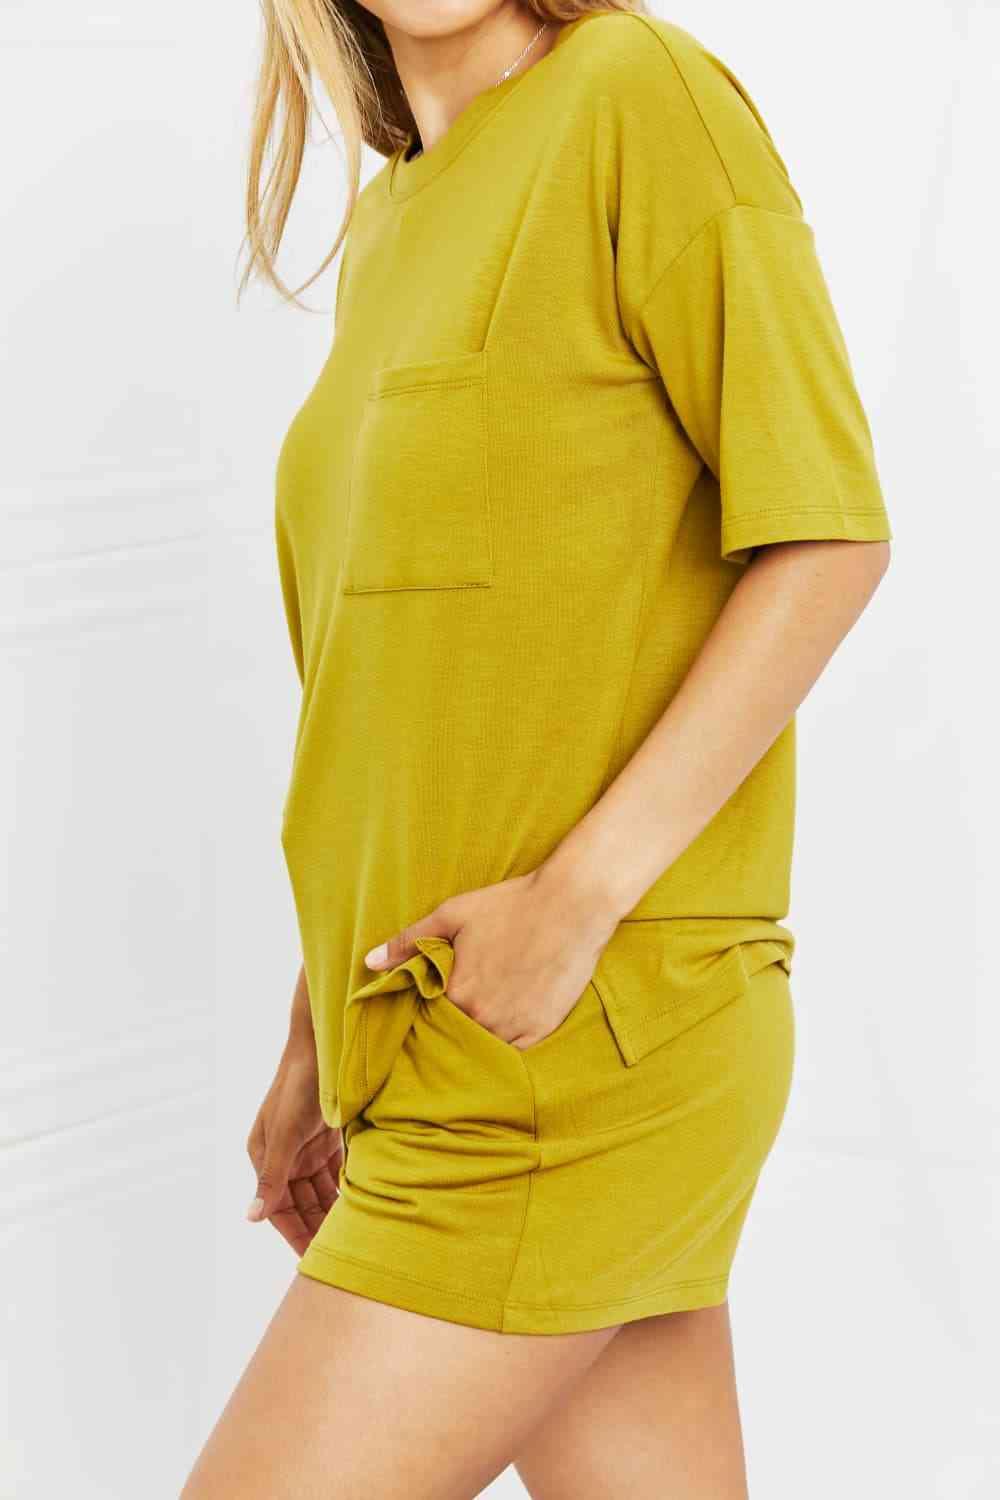 Zenana In The Moment Full Size Lounge Set in Olive Mustard - Immenzive